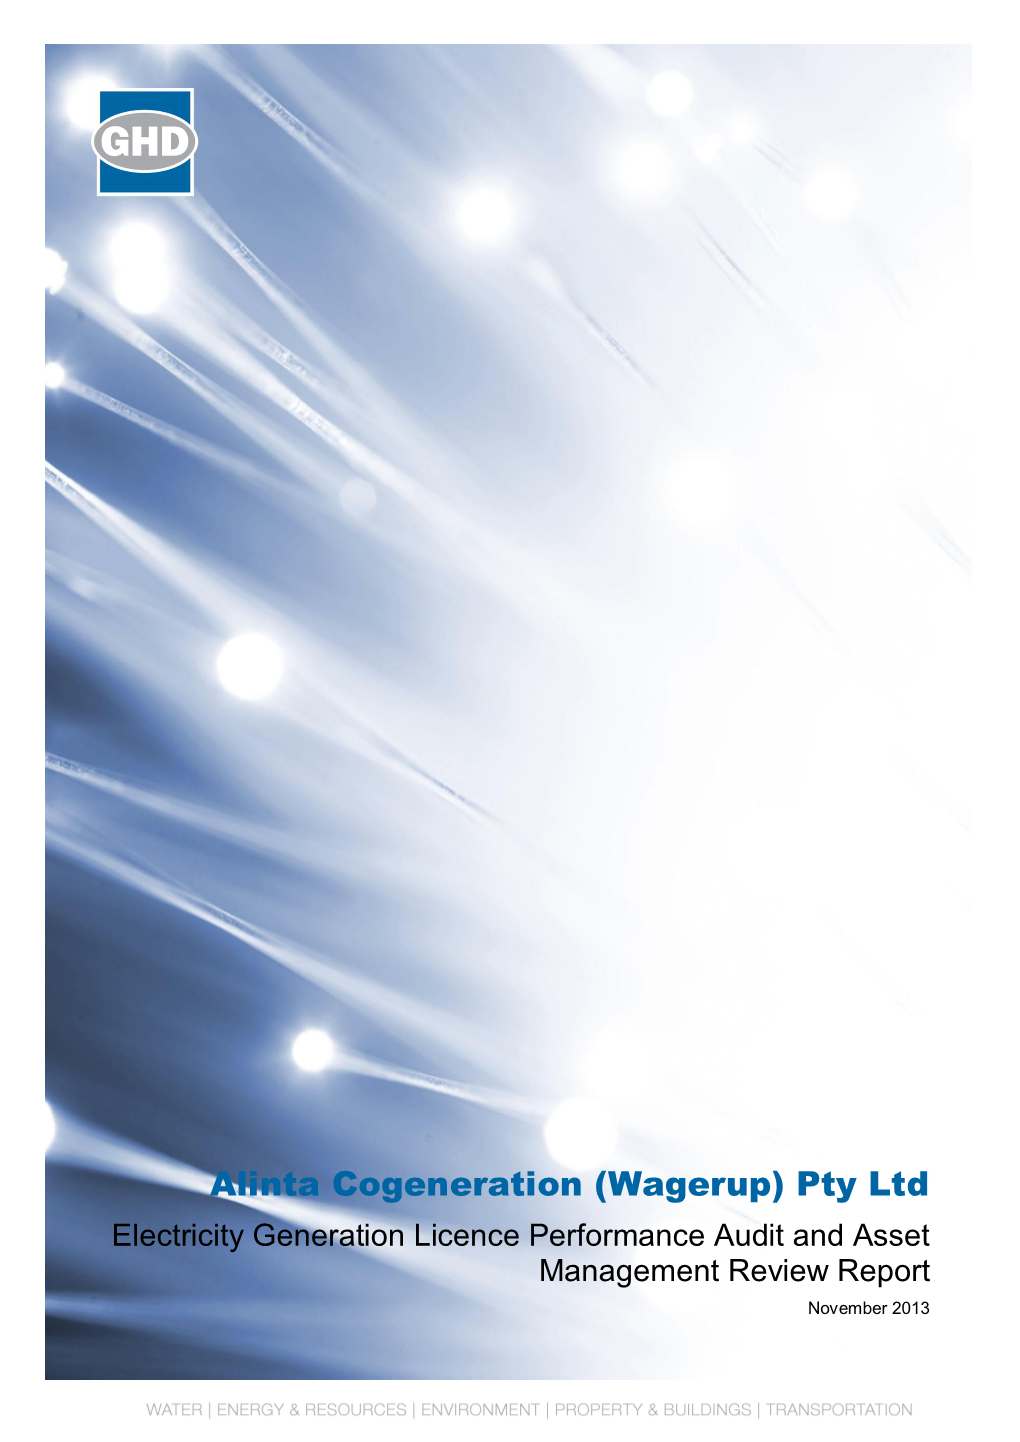 Alinta Cogeneration (Wagerup) Pty Ltd Electricity Generation Licence Performance Audit and Asset Management Review Report November 2013